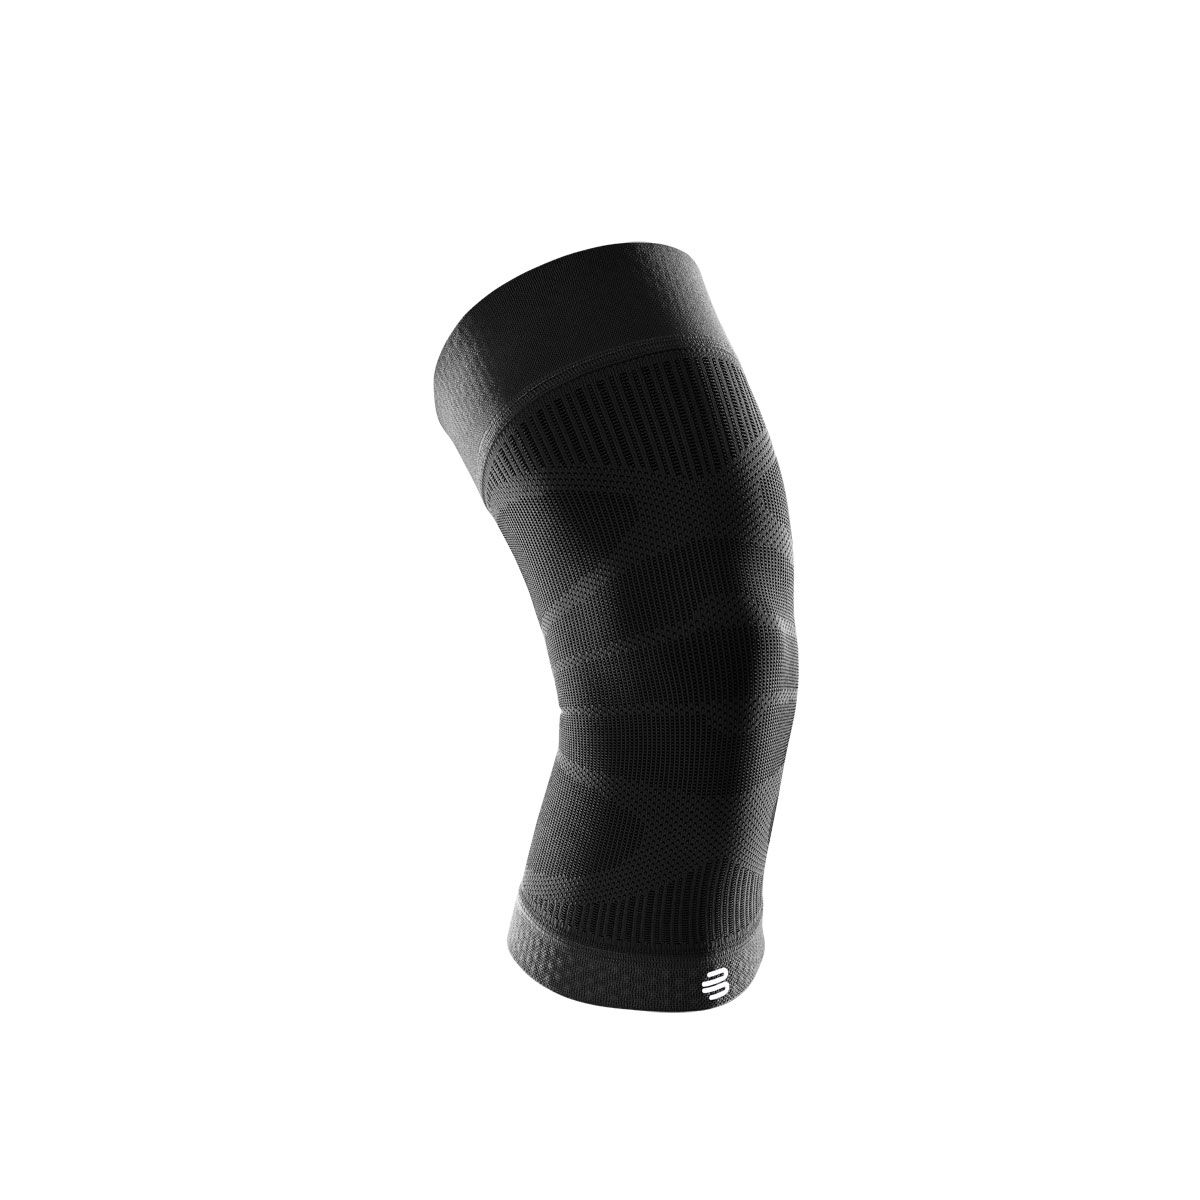 NEW Bauerfeind Sports Compression Knee Support Sleeve Black Size